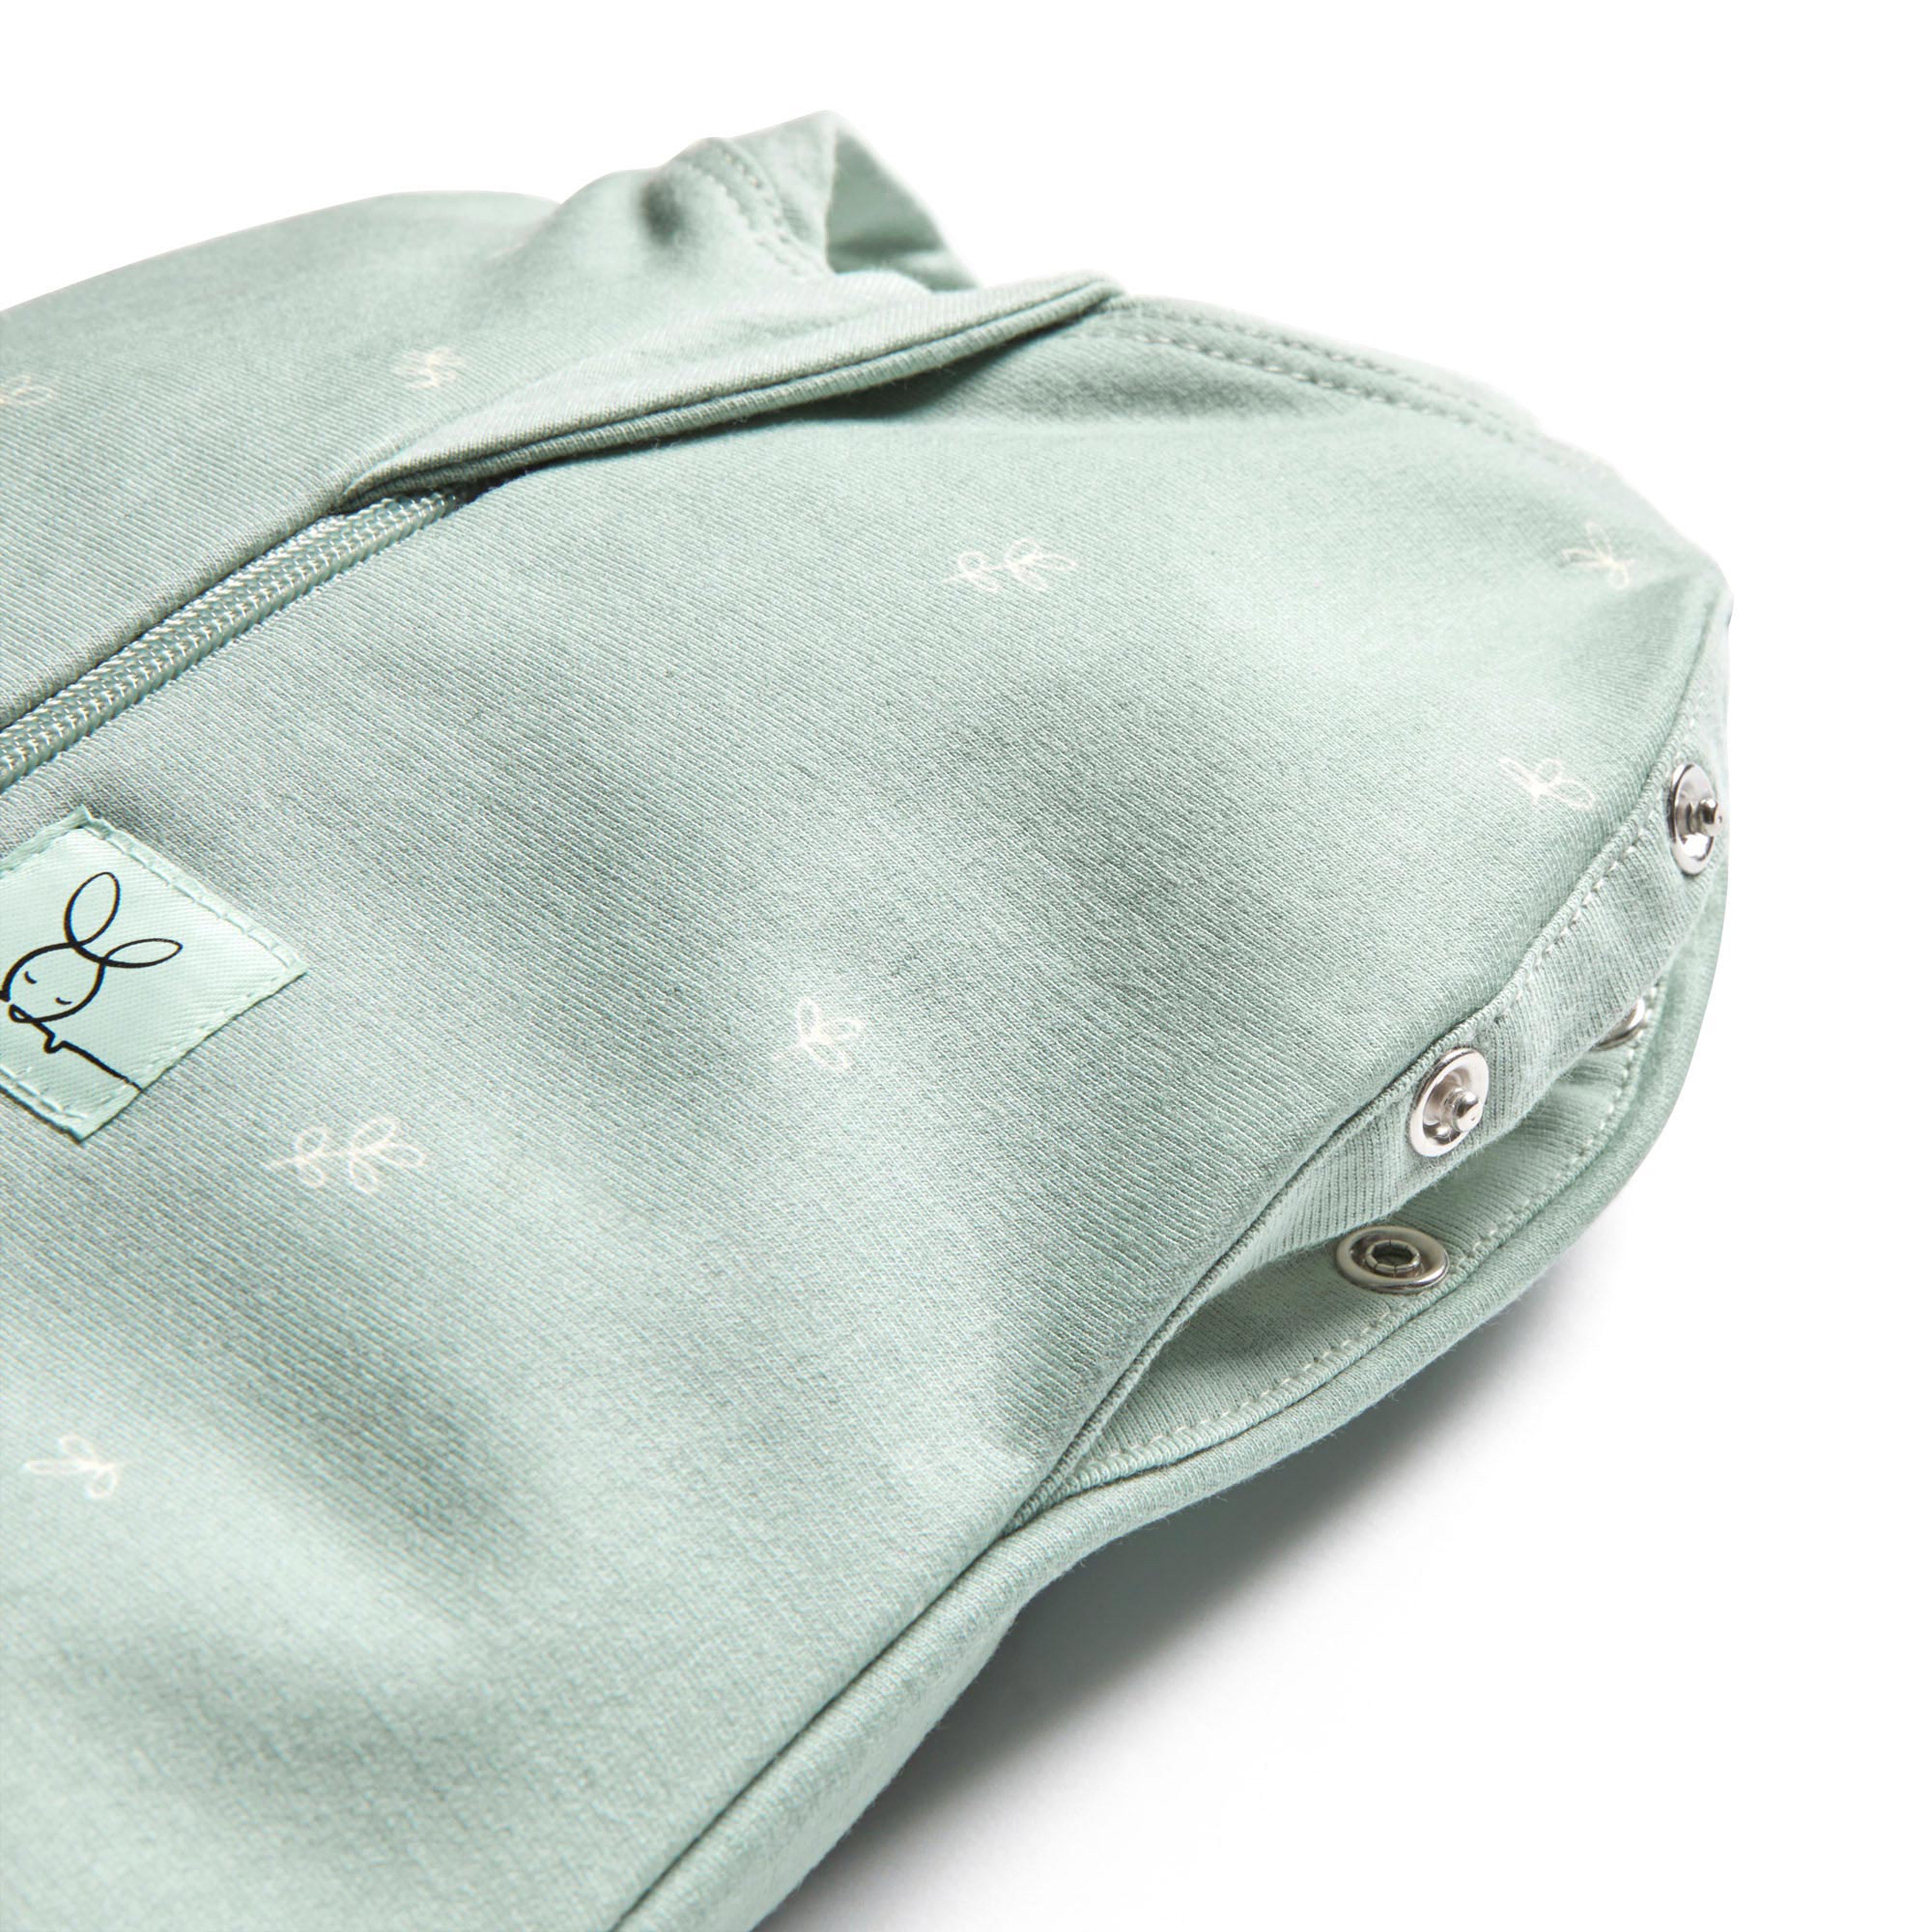 ergopouch-cocoon-swaddle-bag-1-0-tog-berries-ergo-zepco-1-0t00-03mbe20- (3)